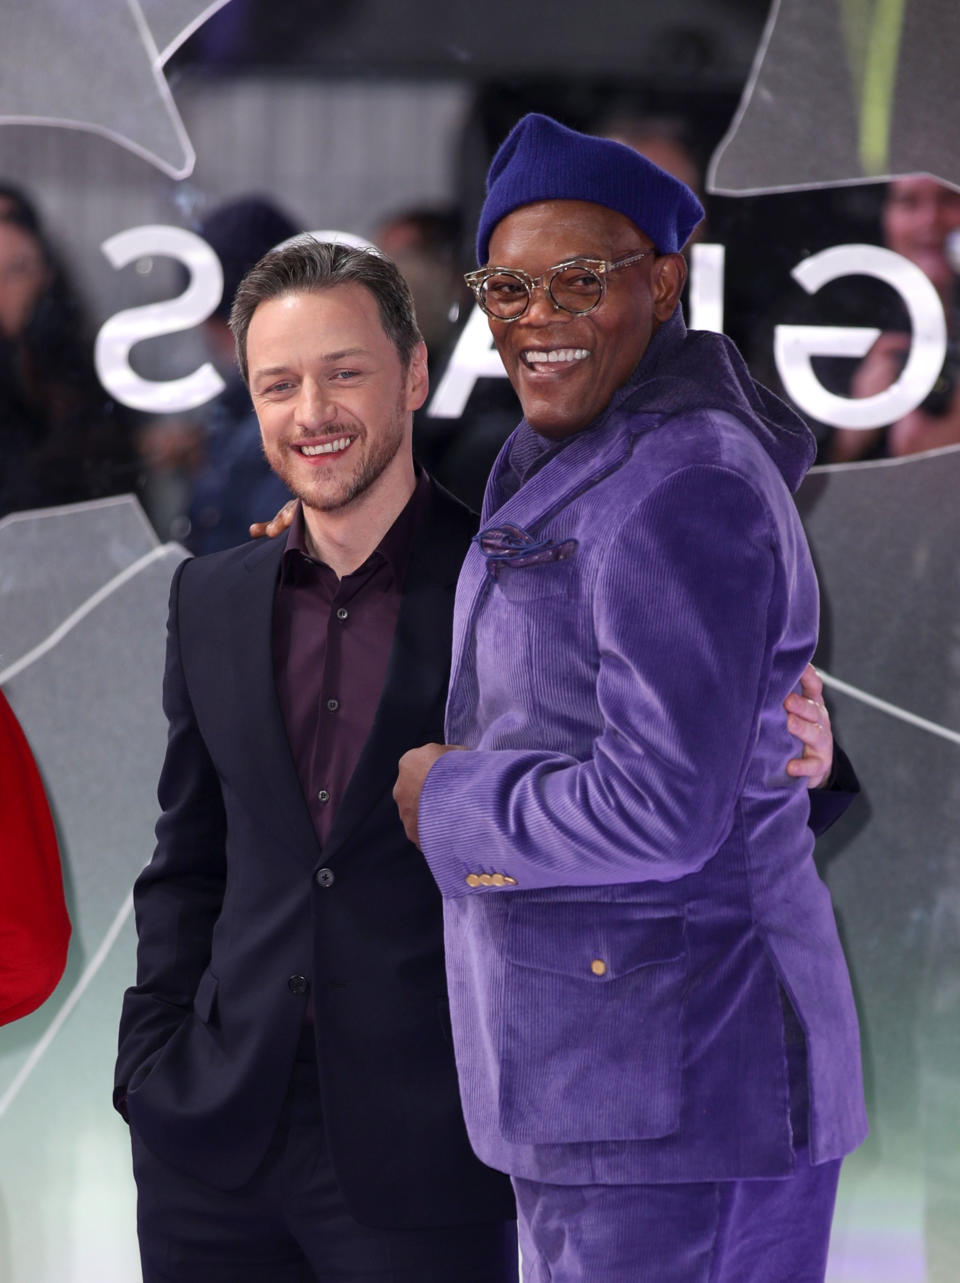 LONDON, ENGLAND - JANUARY 09:  Samuel L Jackson and James McAvoy attend the UK Premiere of "Glass" at The Curzon Mayfair on January 09, 2019 in London, England. (Photo by Mike Marsland/ Mike Marsland/WireImage)